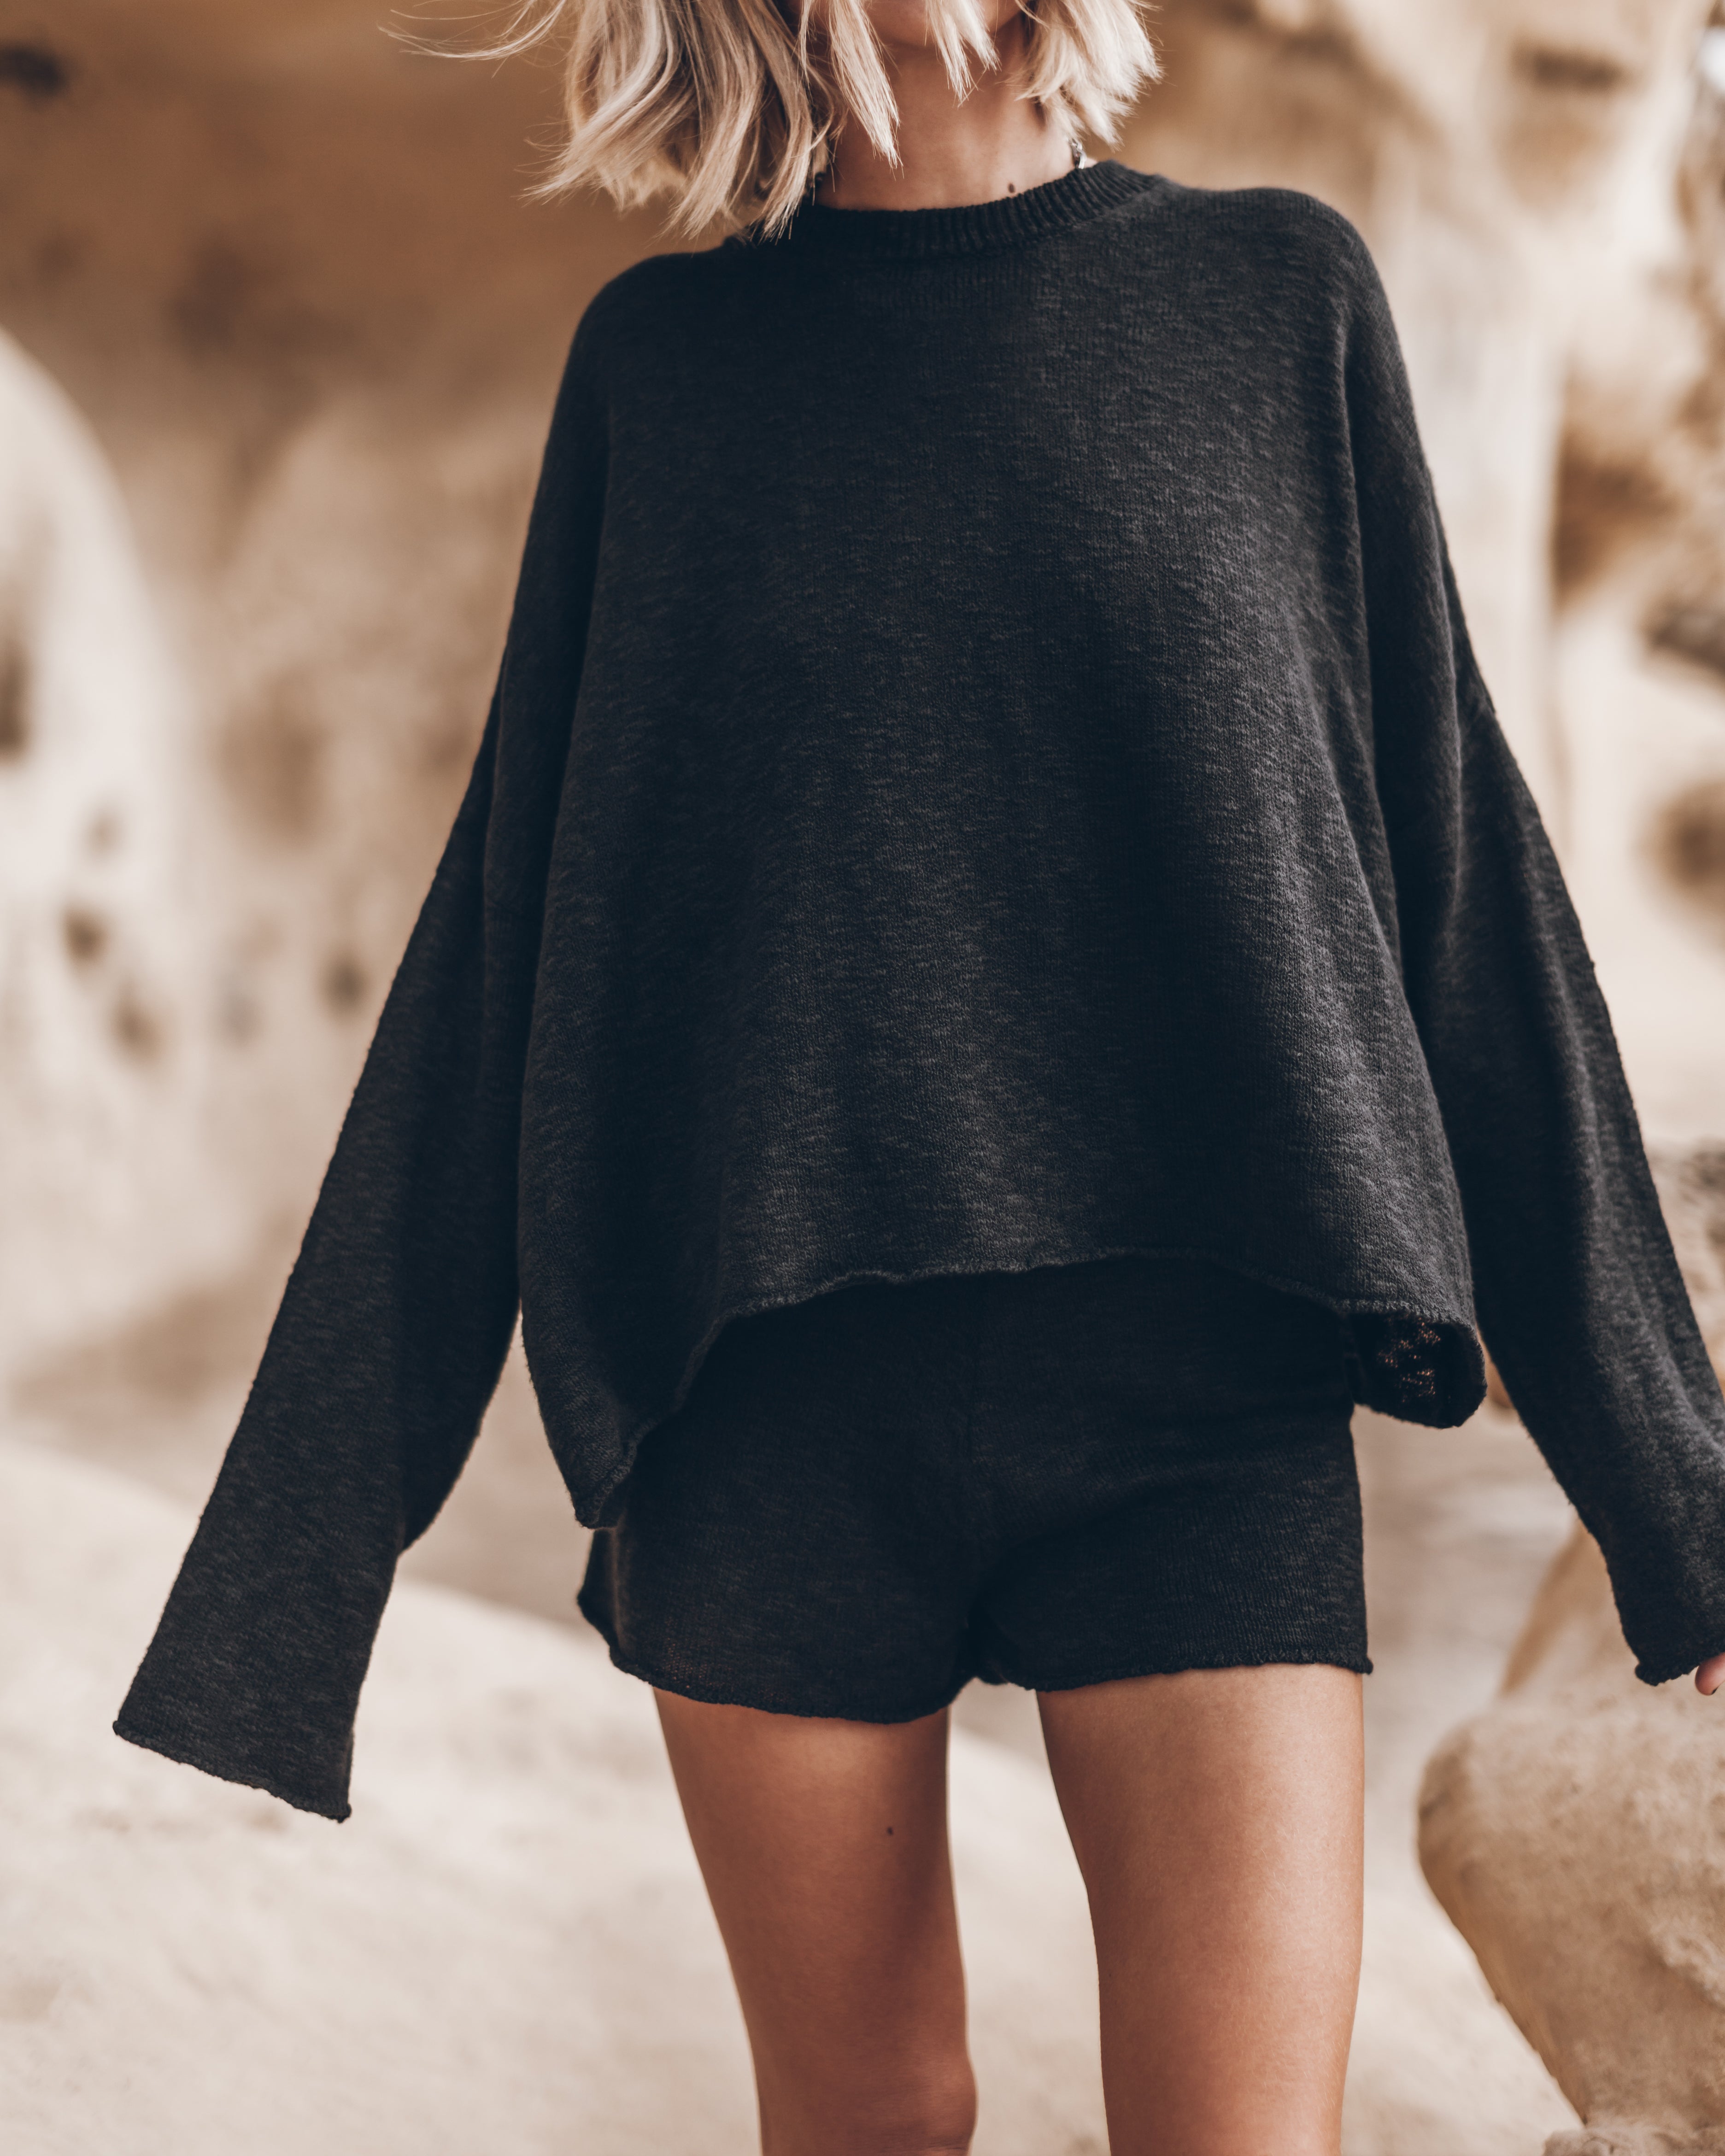 The Black Thin Knit Sweater